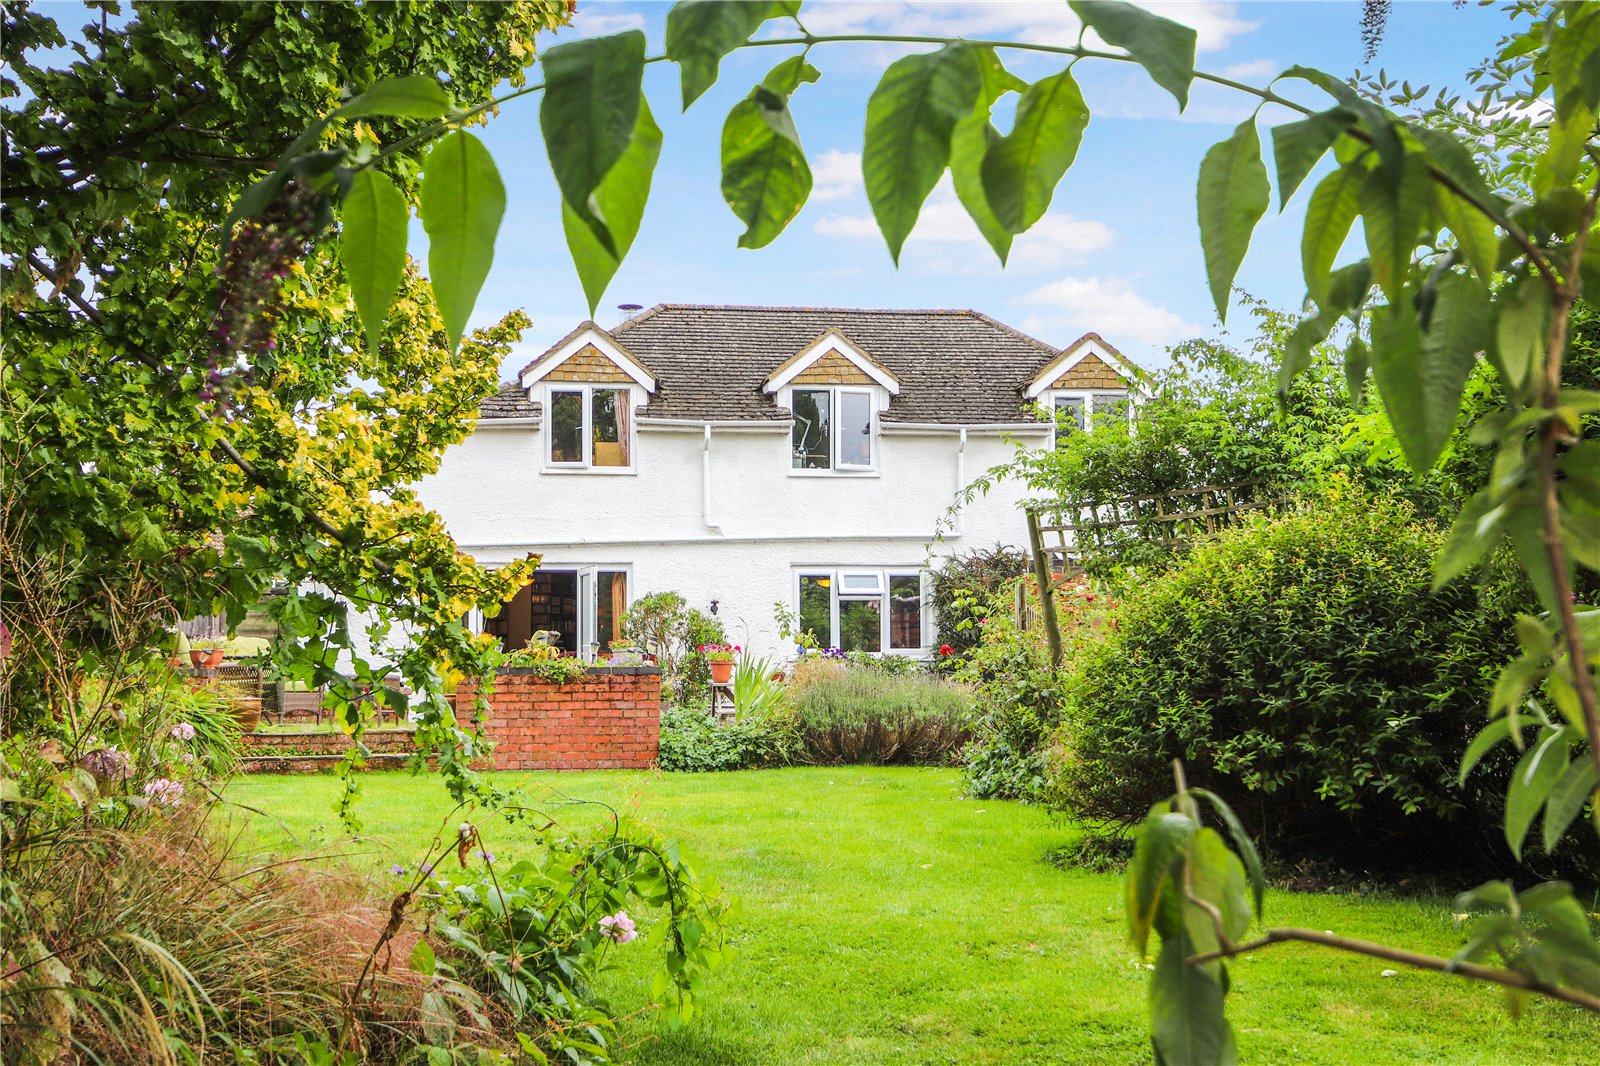 5 Bedroom House for sale in Tring